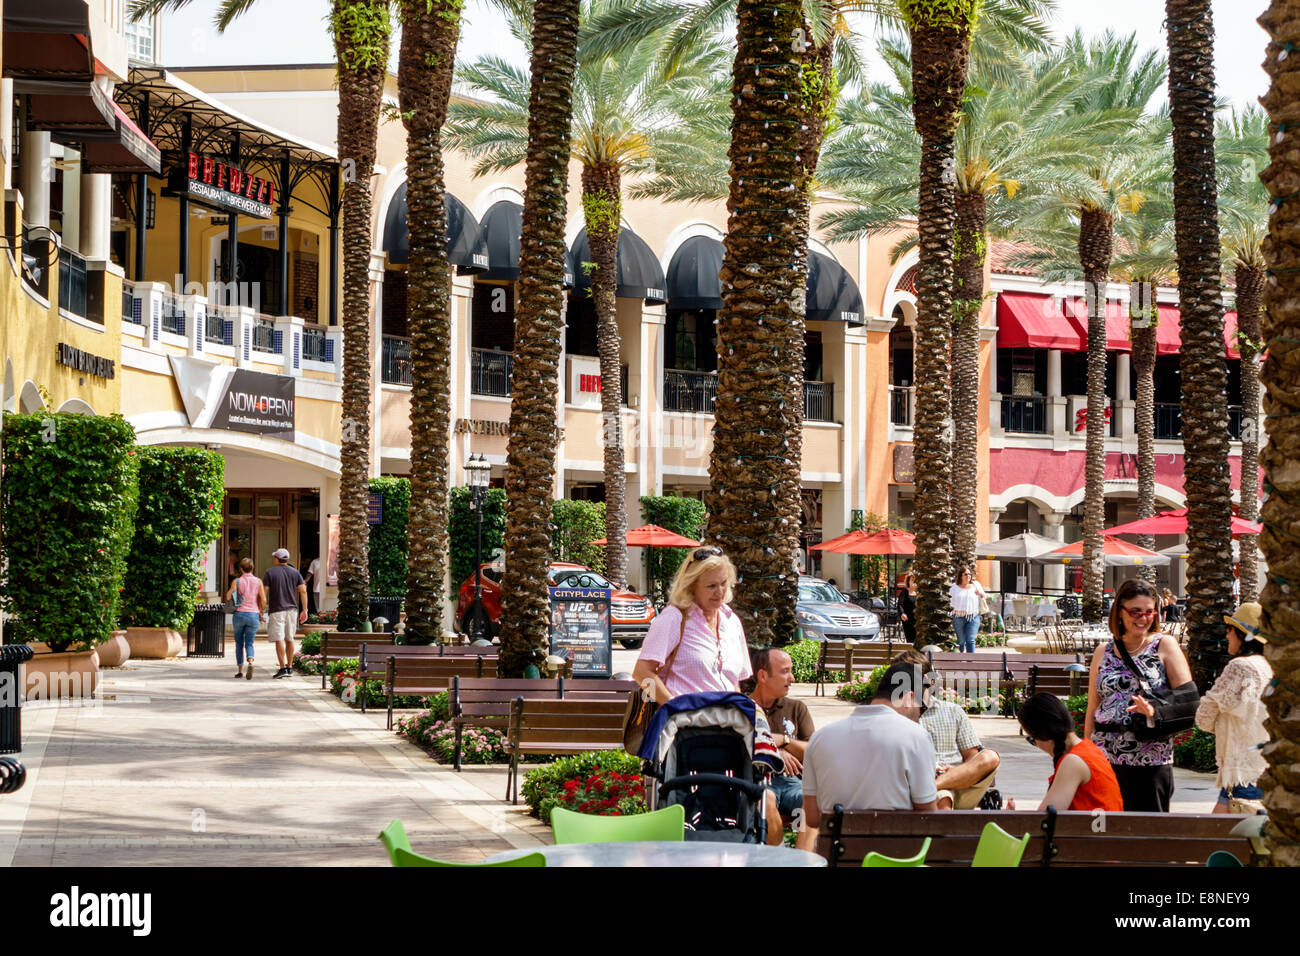 West Palm Beach Florida,The Square formerly CityPlace,City Place,shopping  shopper shoppers shop shops market markets marketplace buying  selling,retail store stores busine Stock Photo - Alamy